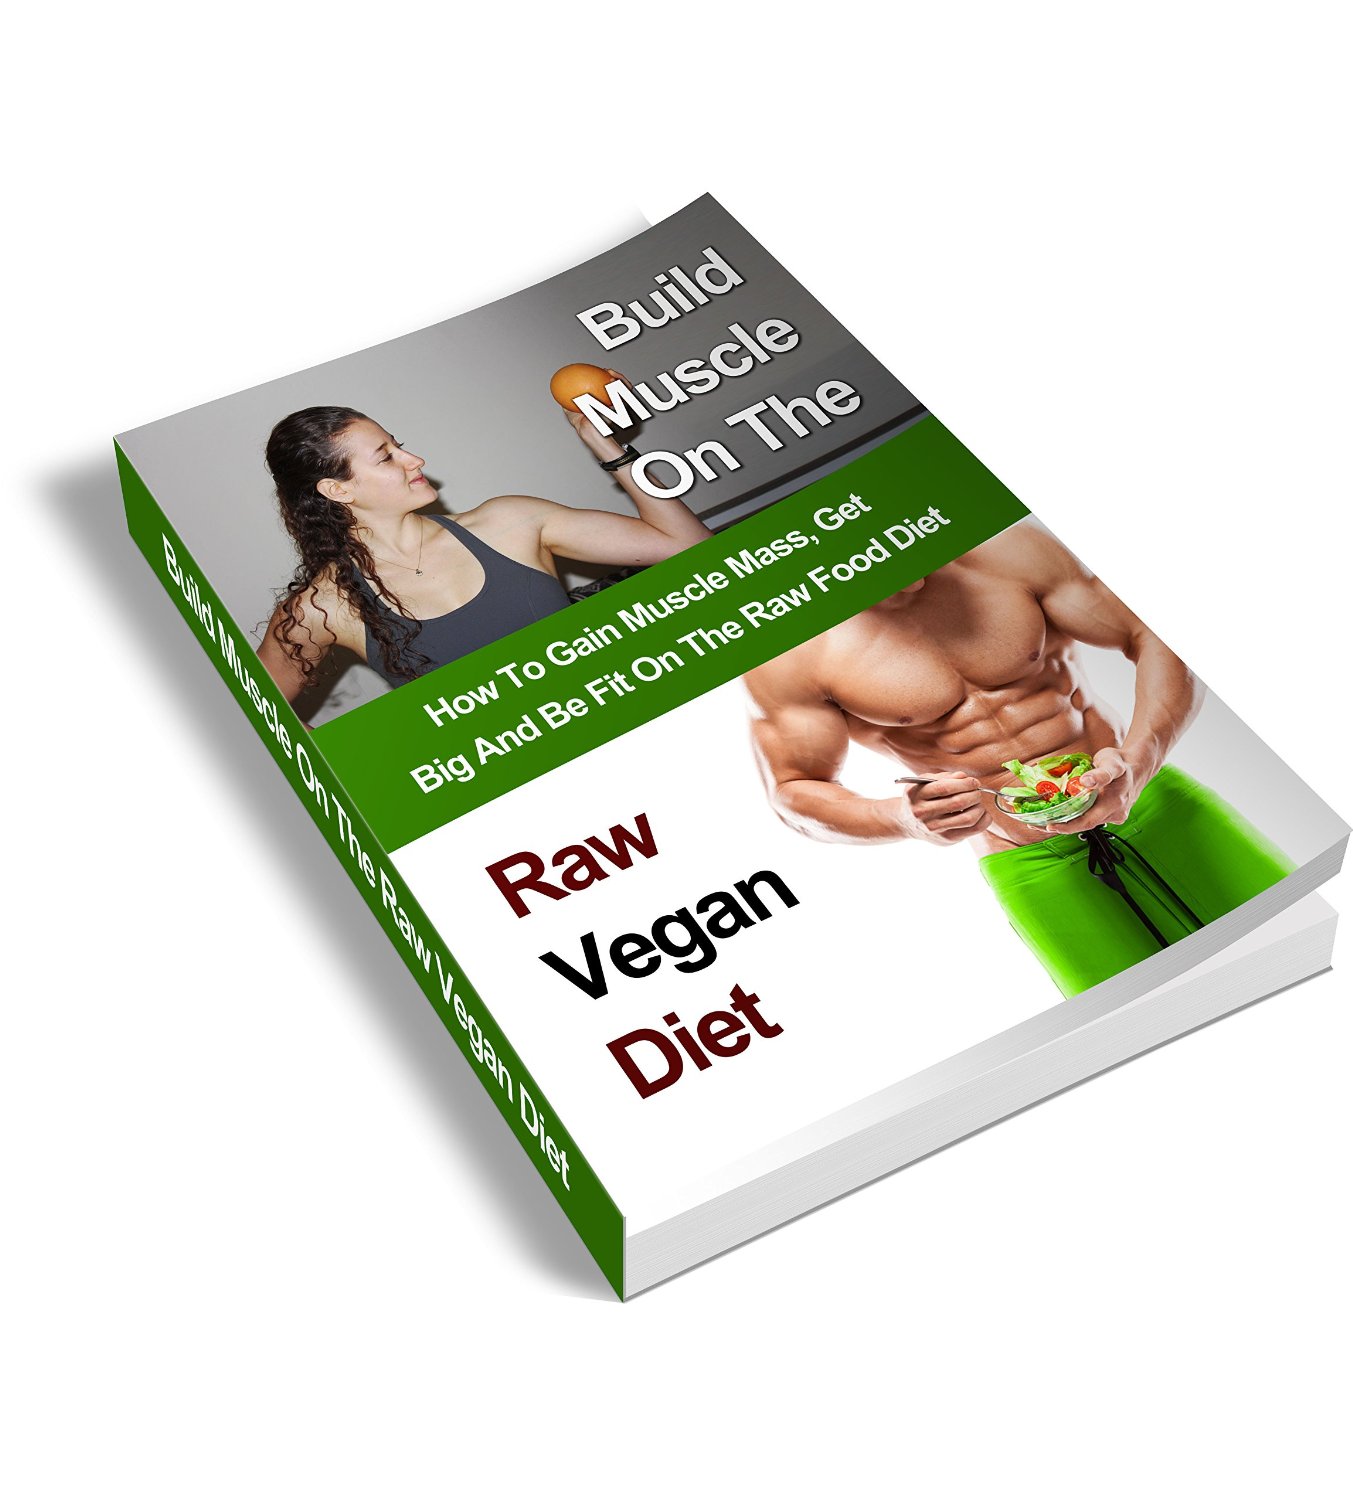 Build Muscle on the Raw Vegan Diet: How to Gain Muscle Mass, Get Big and Be Fit on the Raw Food Diet by sivan berko